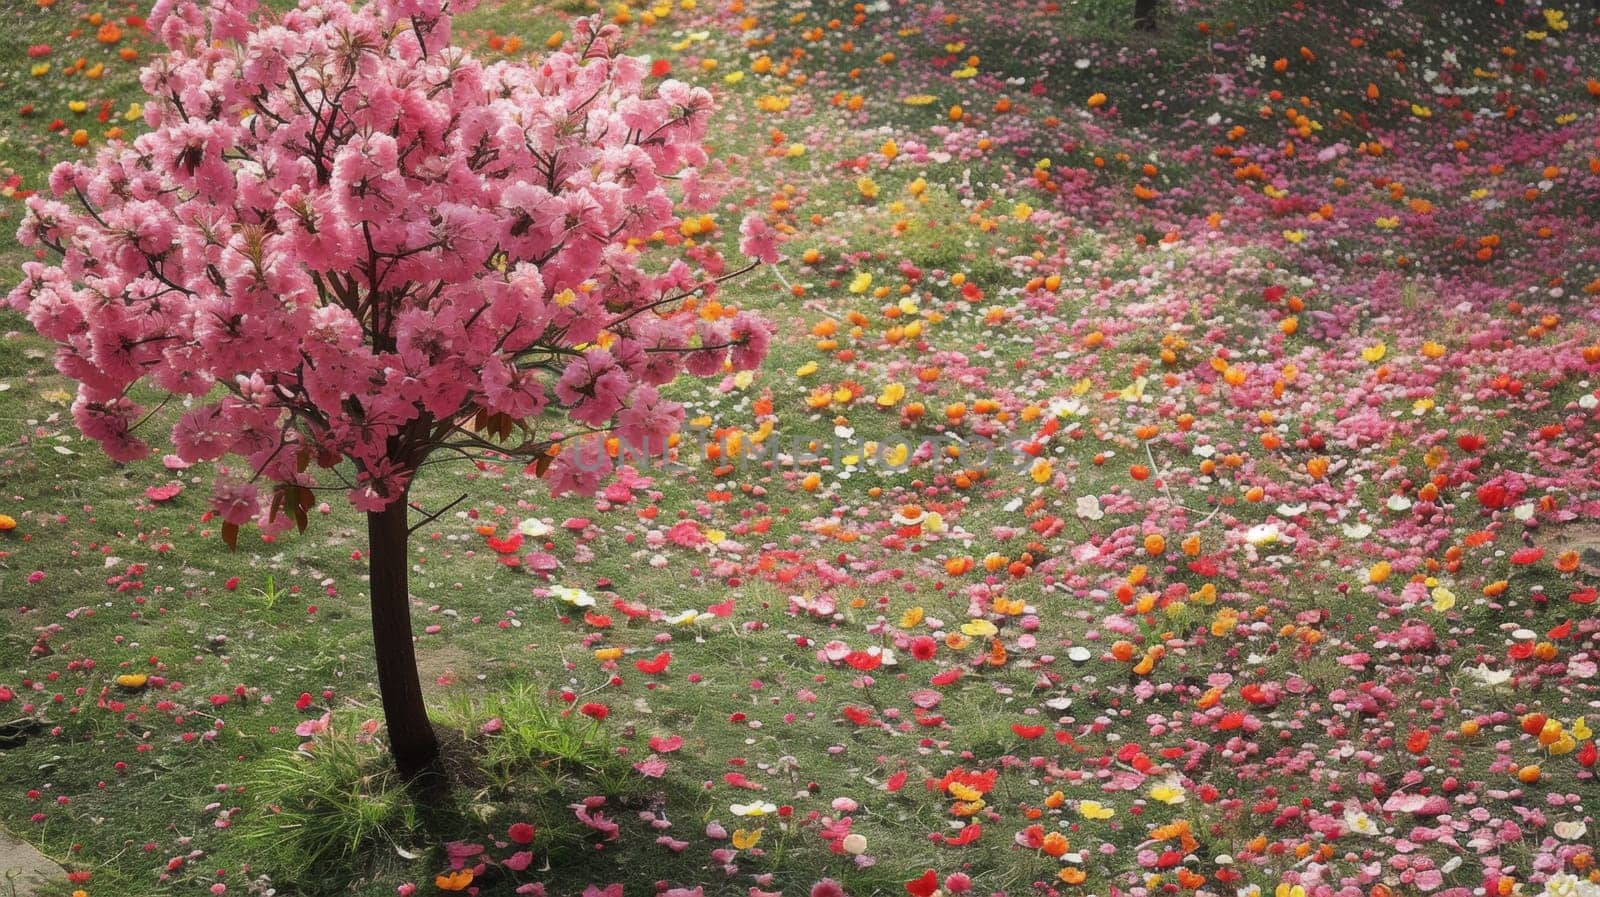 A pink tree in a field of flowers with many other trees